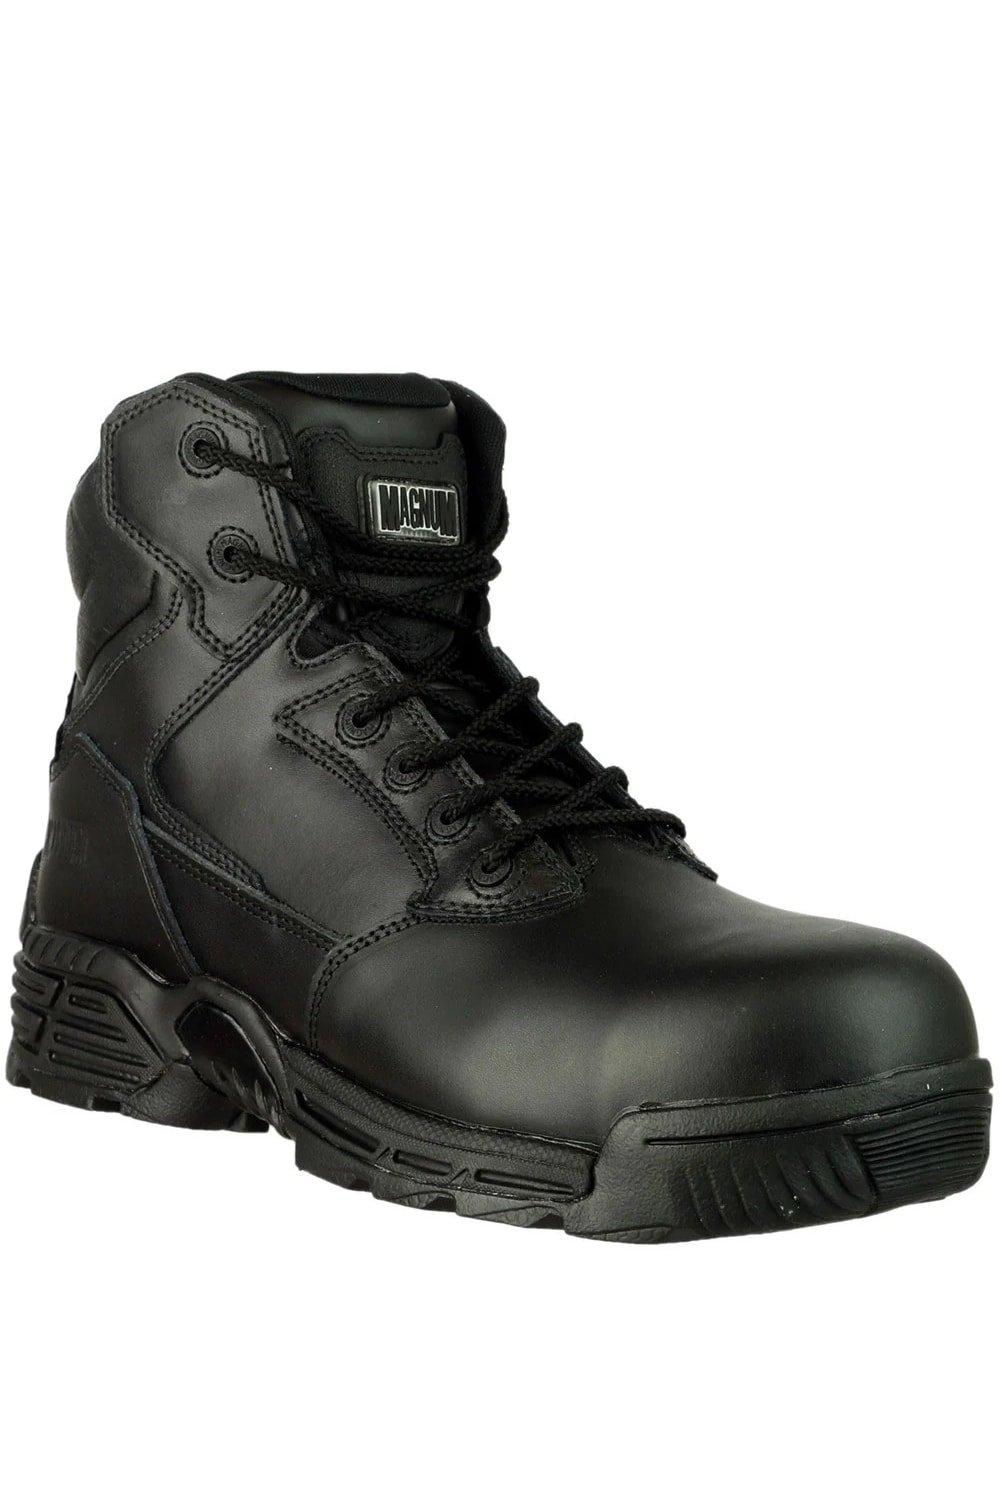 Stealth Force 6.0 Leather Safety Boots